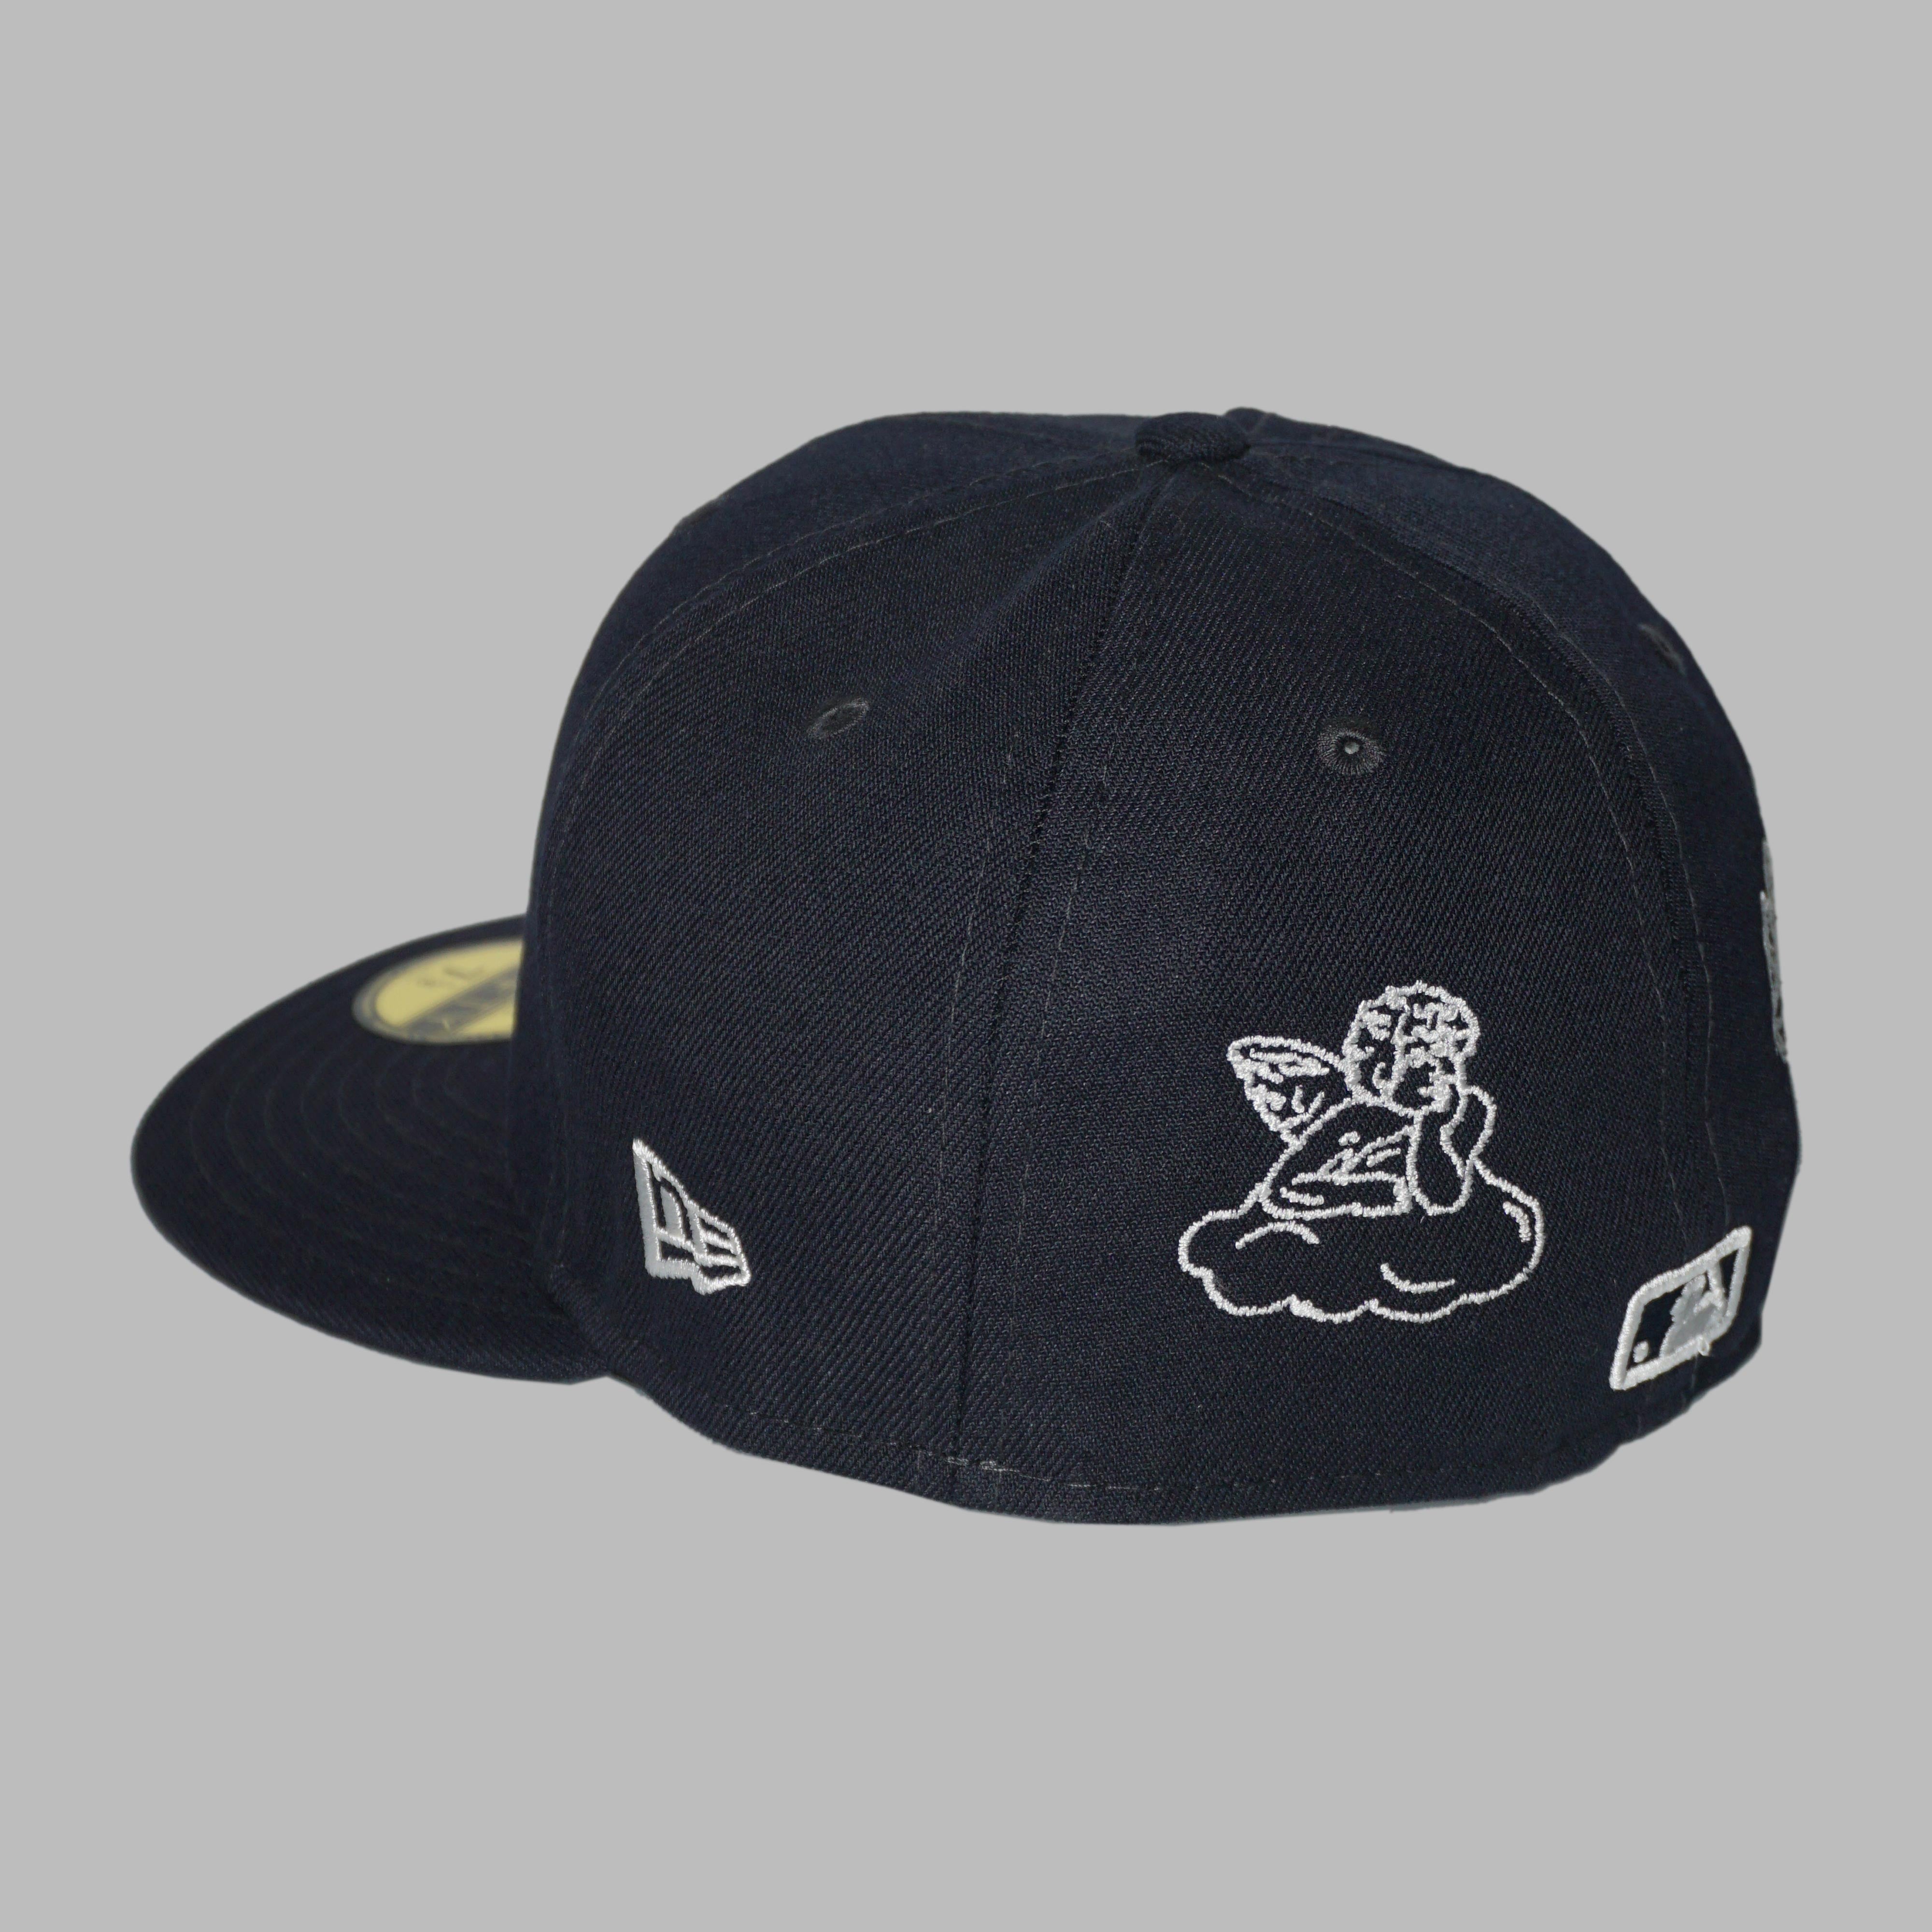 NAVY HOLY FITTED (size 7 1/8)